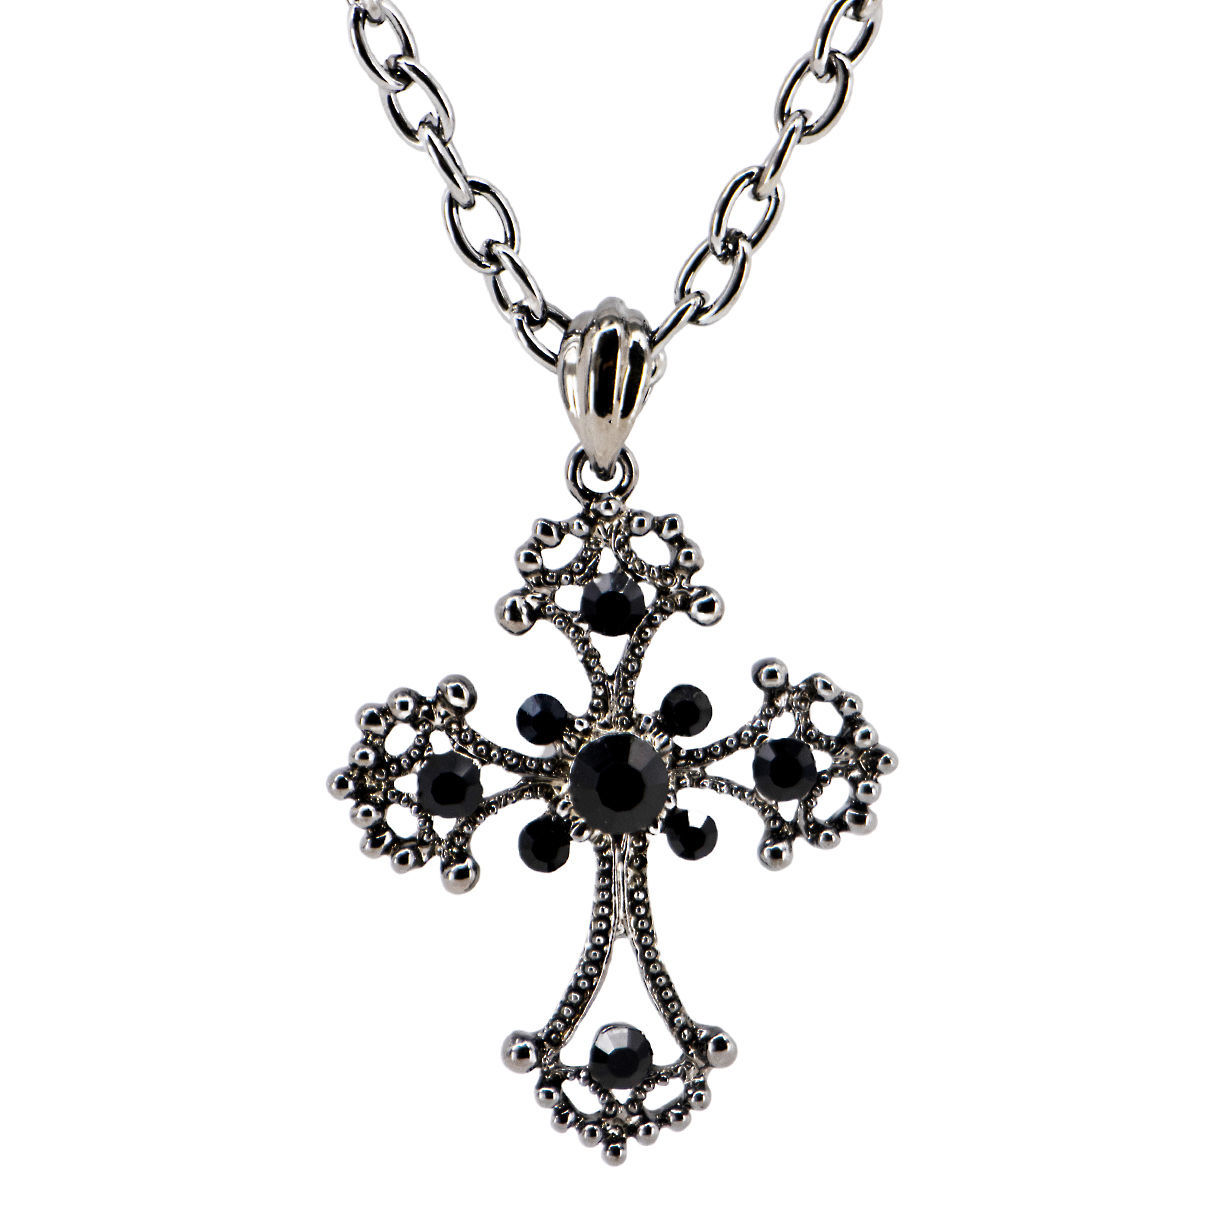 black Renaissance-styled cross is encrusted with 9  crystals with rich filigree and hangs from a 20" chain